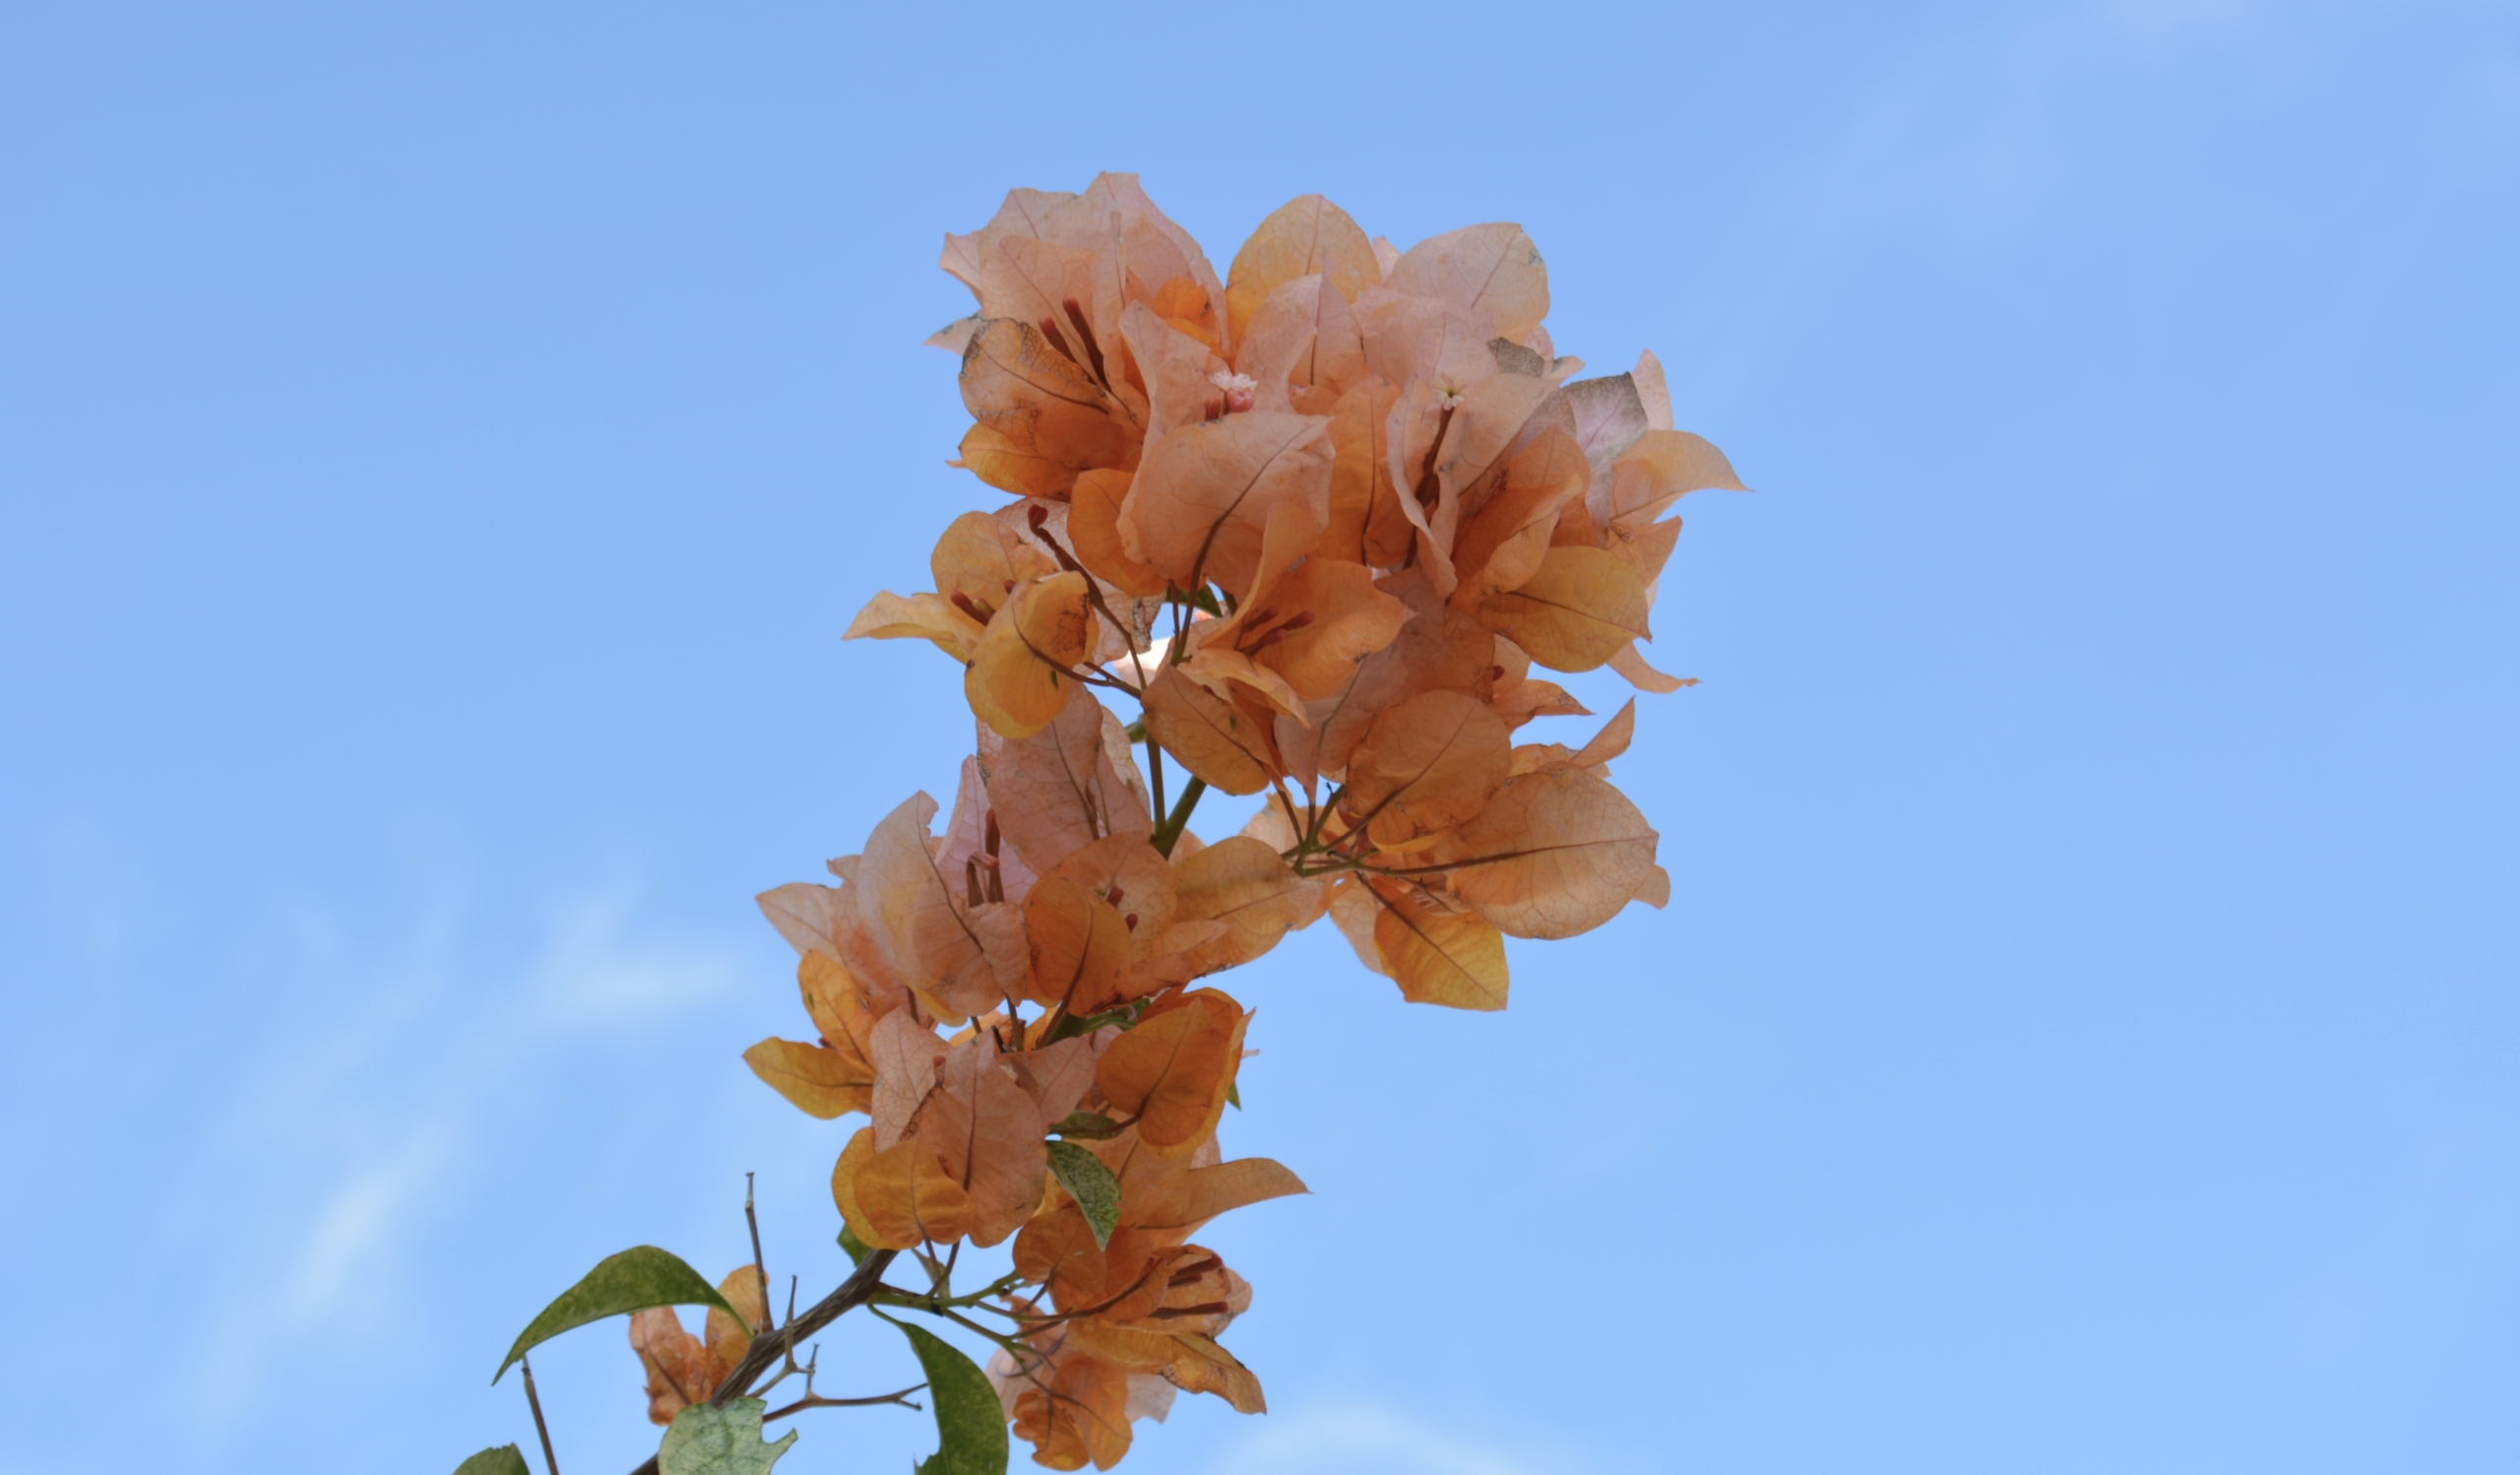 peach colored flower agains a blue sky showing kindness